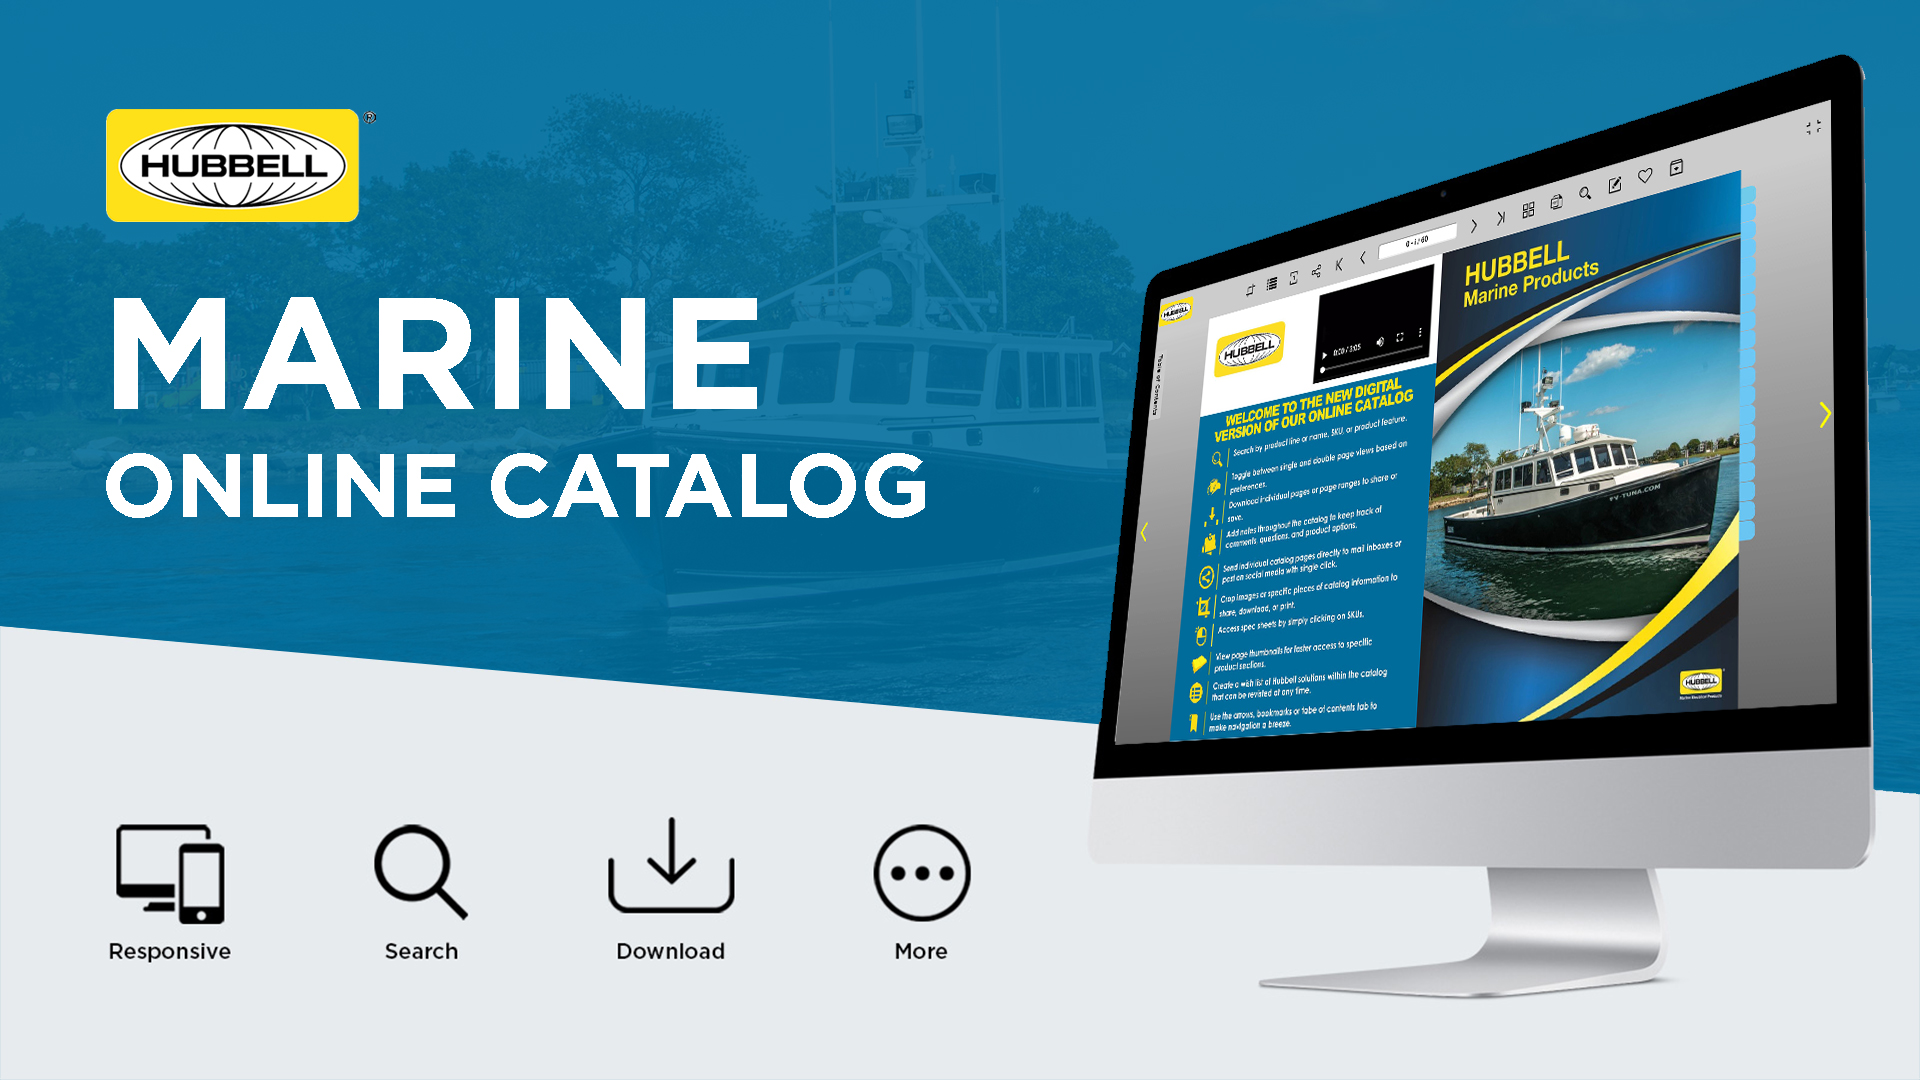 An Easy Way to Find Marine Products for Your Boat or Yacht